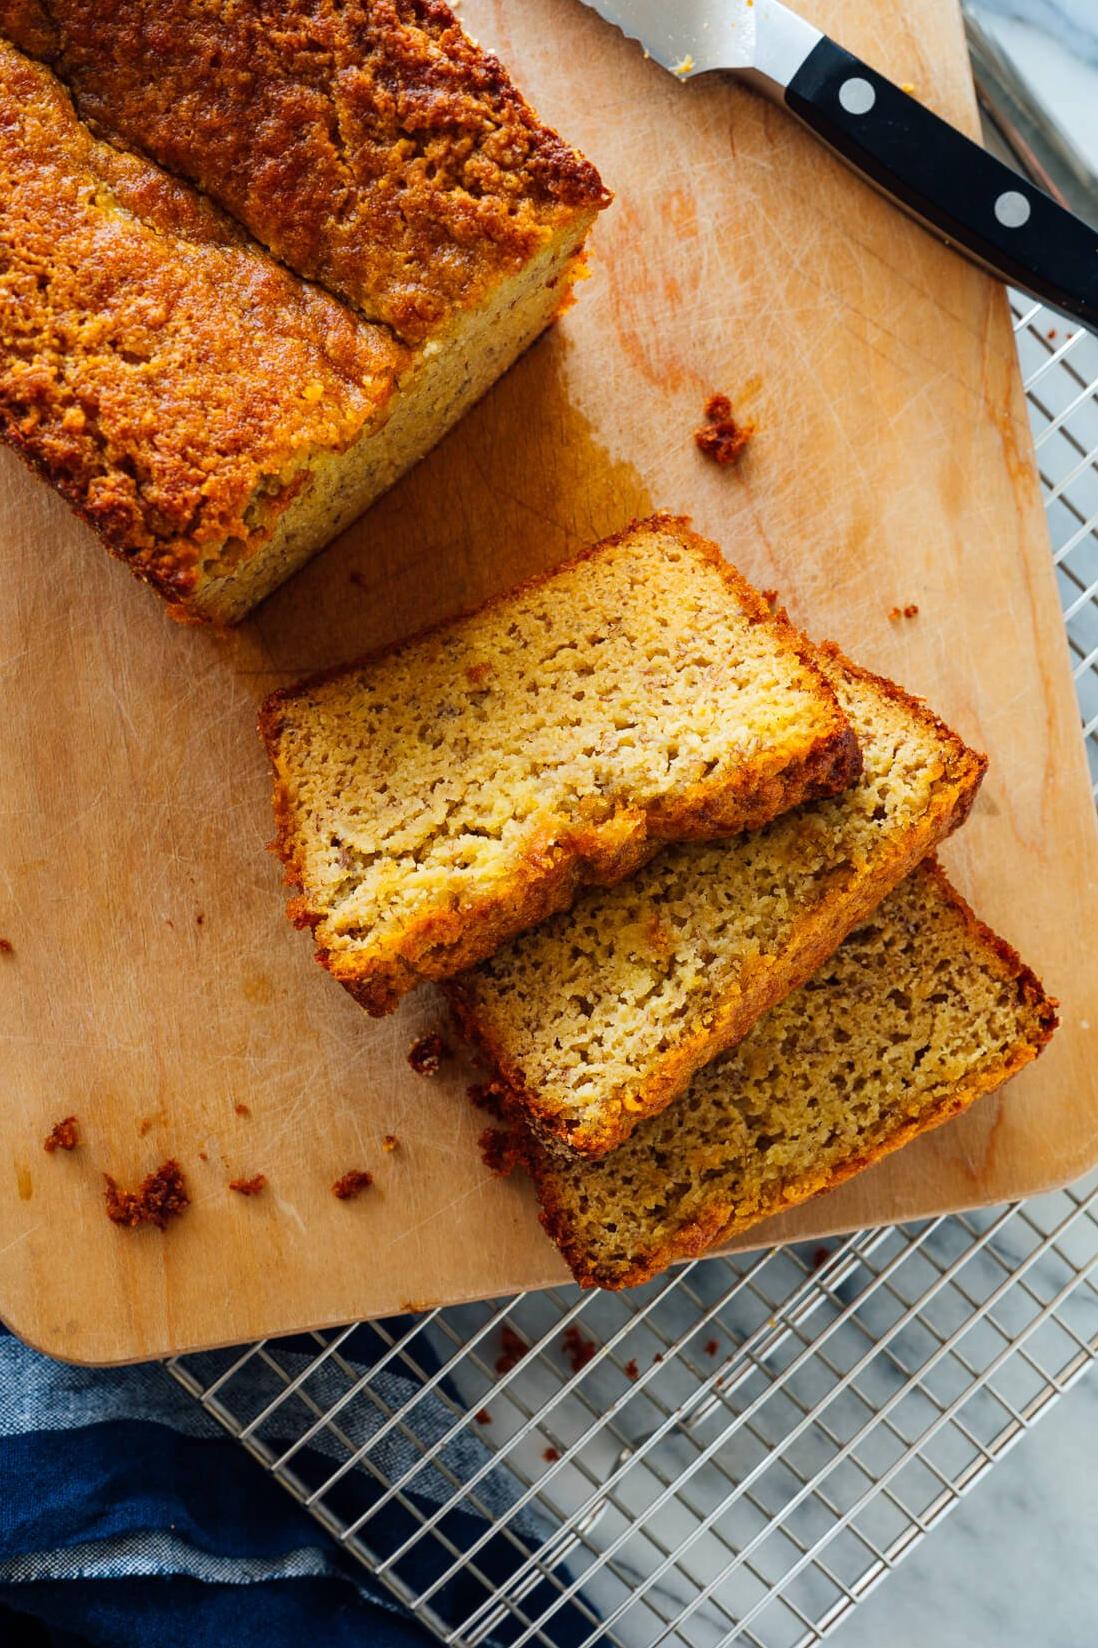  Simple ingredients, amazing flavor: This recipe proves that baking doesn't have to be complicated